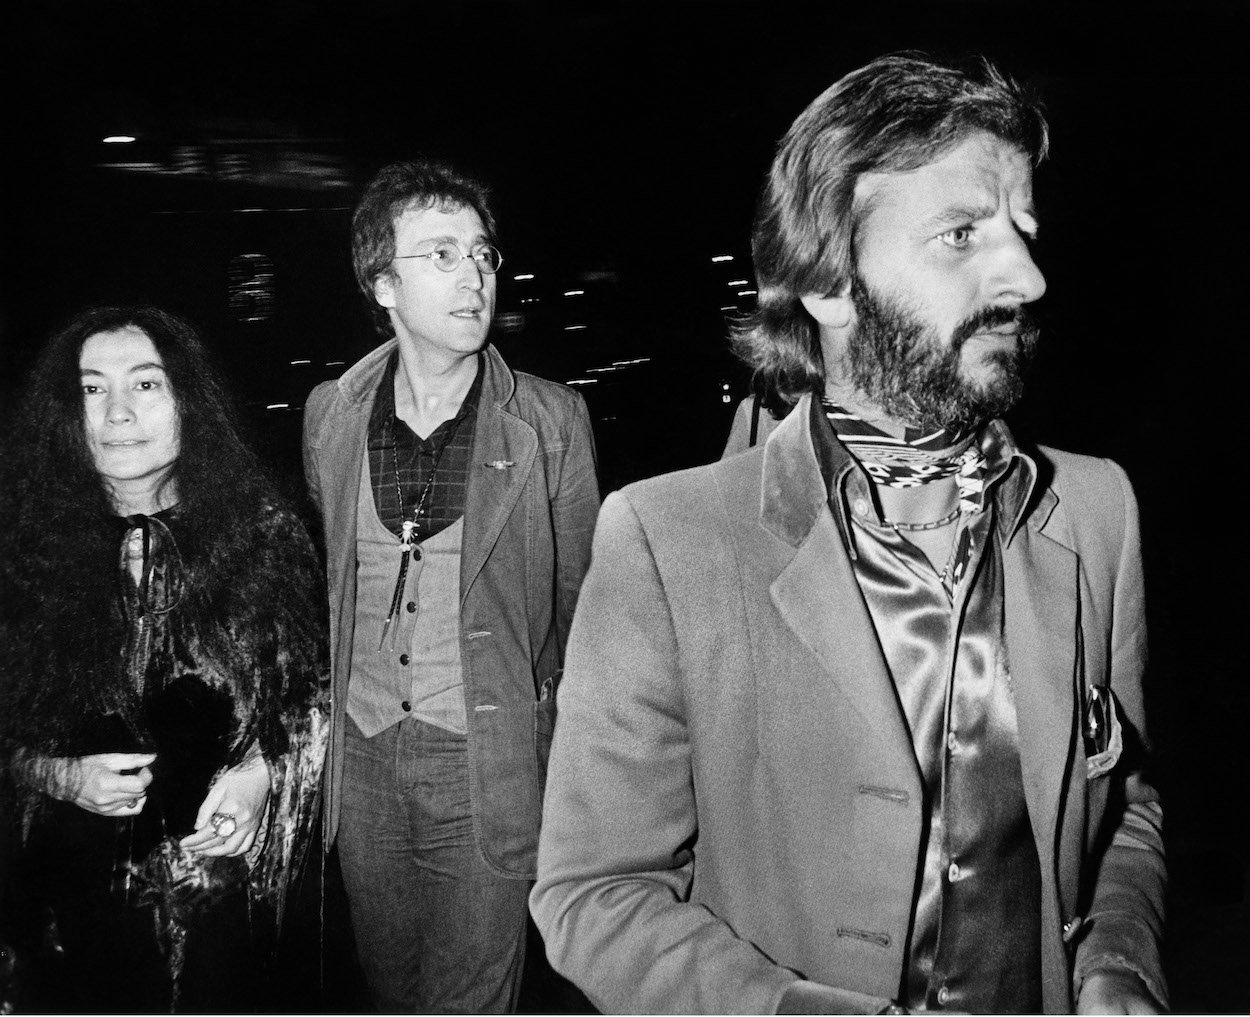 Yoko Ono (from left), John Lennon, and Ringo Starr, whose reaction to Yoko Ono being around The Beatles was authentically Ringo, arrive at a Los Angeles club in 1975.